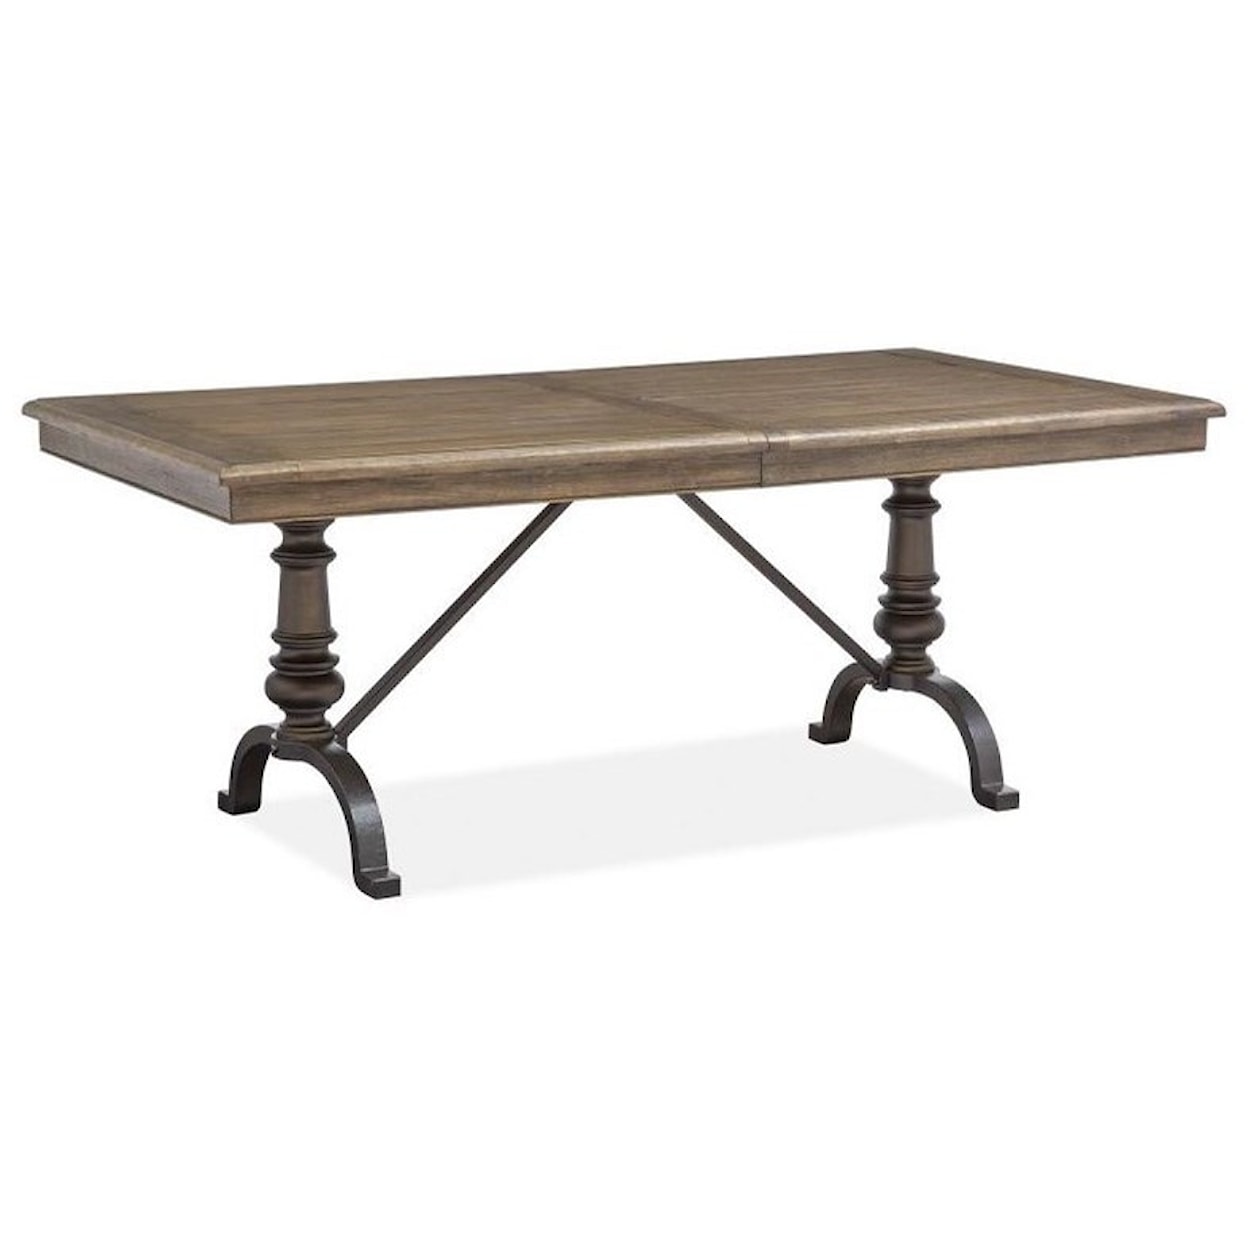 Belfort Select Withers Grove Rectangular Dining Table